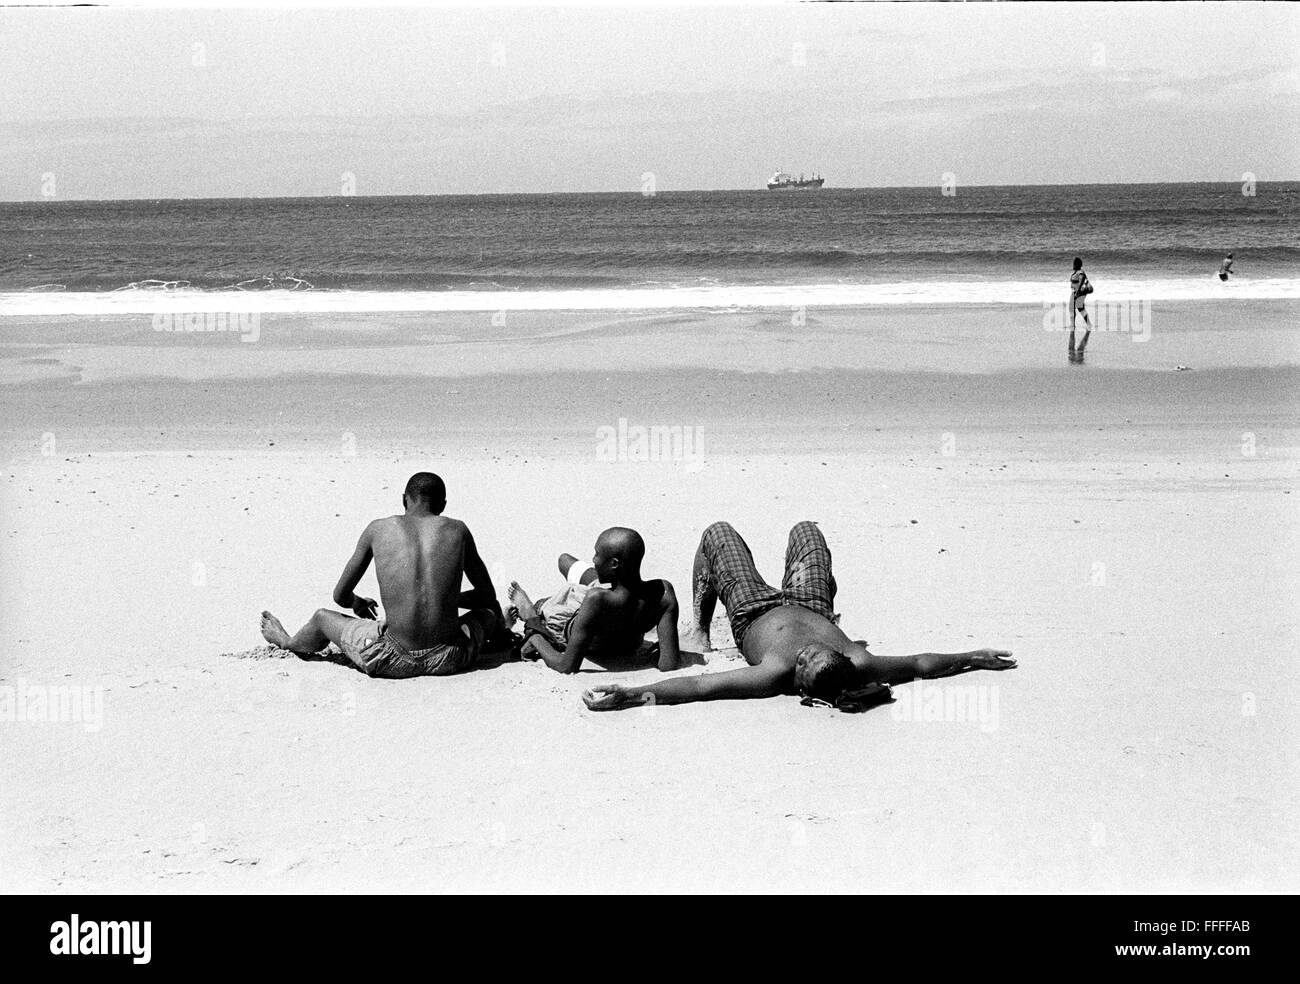 Jan 4, 2016 - South Beach, KwaZulu-Natal, South Africa - Three young men sun bathing with a ship and a man walking in the background. South Beach is a part of the City of Durban's longest uninterrupted stretch of beach sand. The City of Durban is on the eastern seaboard of South Africa and the people here are washed with the warm waters of the Indian Ocean. To the north of this stretch of sand are beaches with cafe society hang outs. To the south there is a pier with the upmarket Moyo's Restaurant at it's end and the uShaka Marine World complex and the private surf and sea clubs of the Vetches Stock Photo